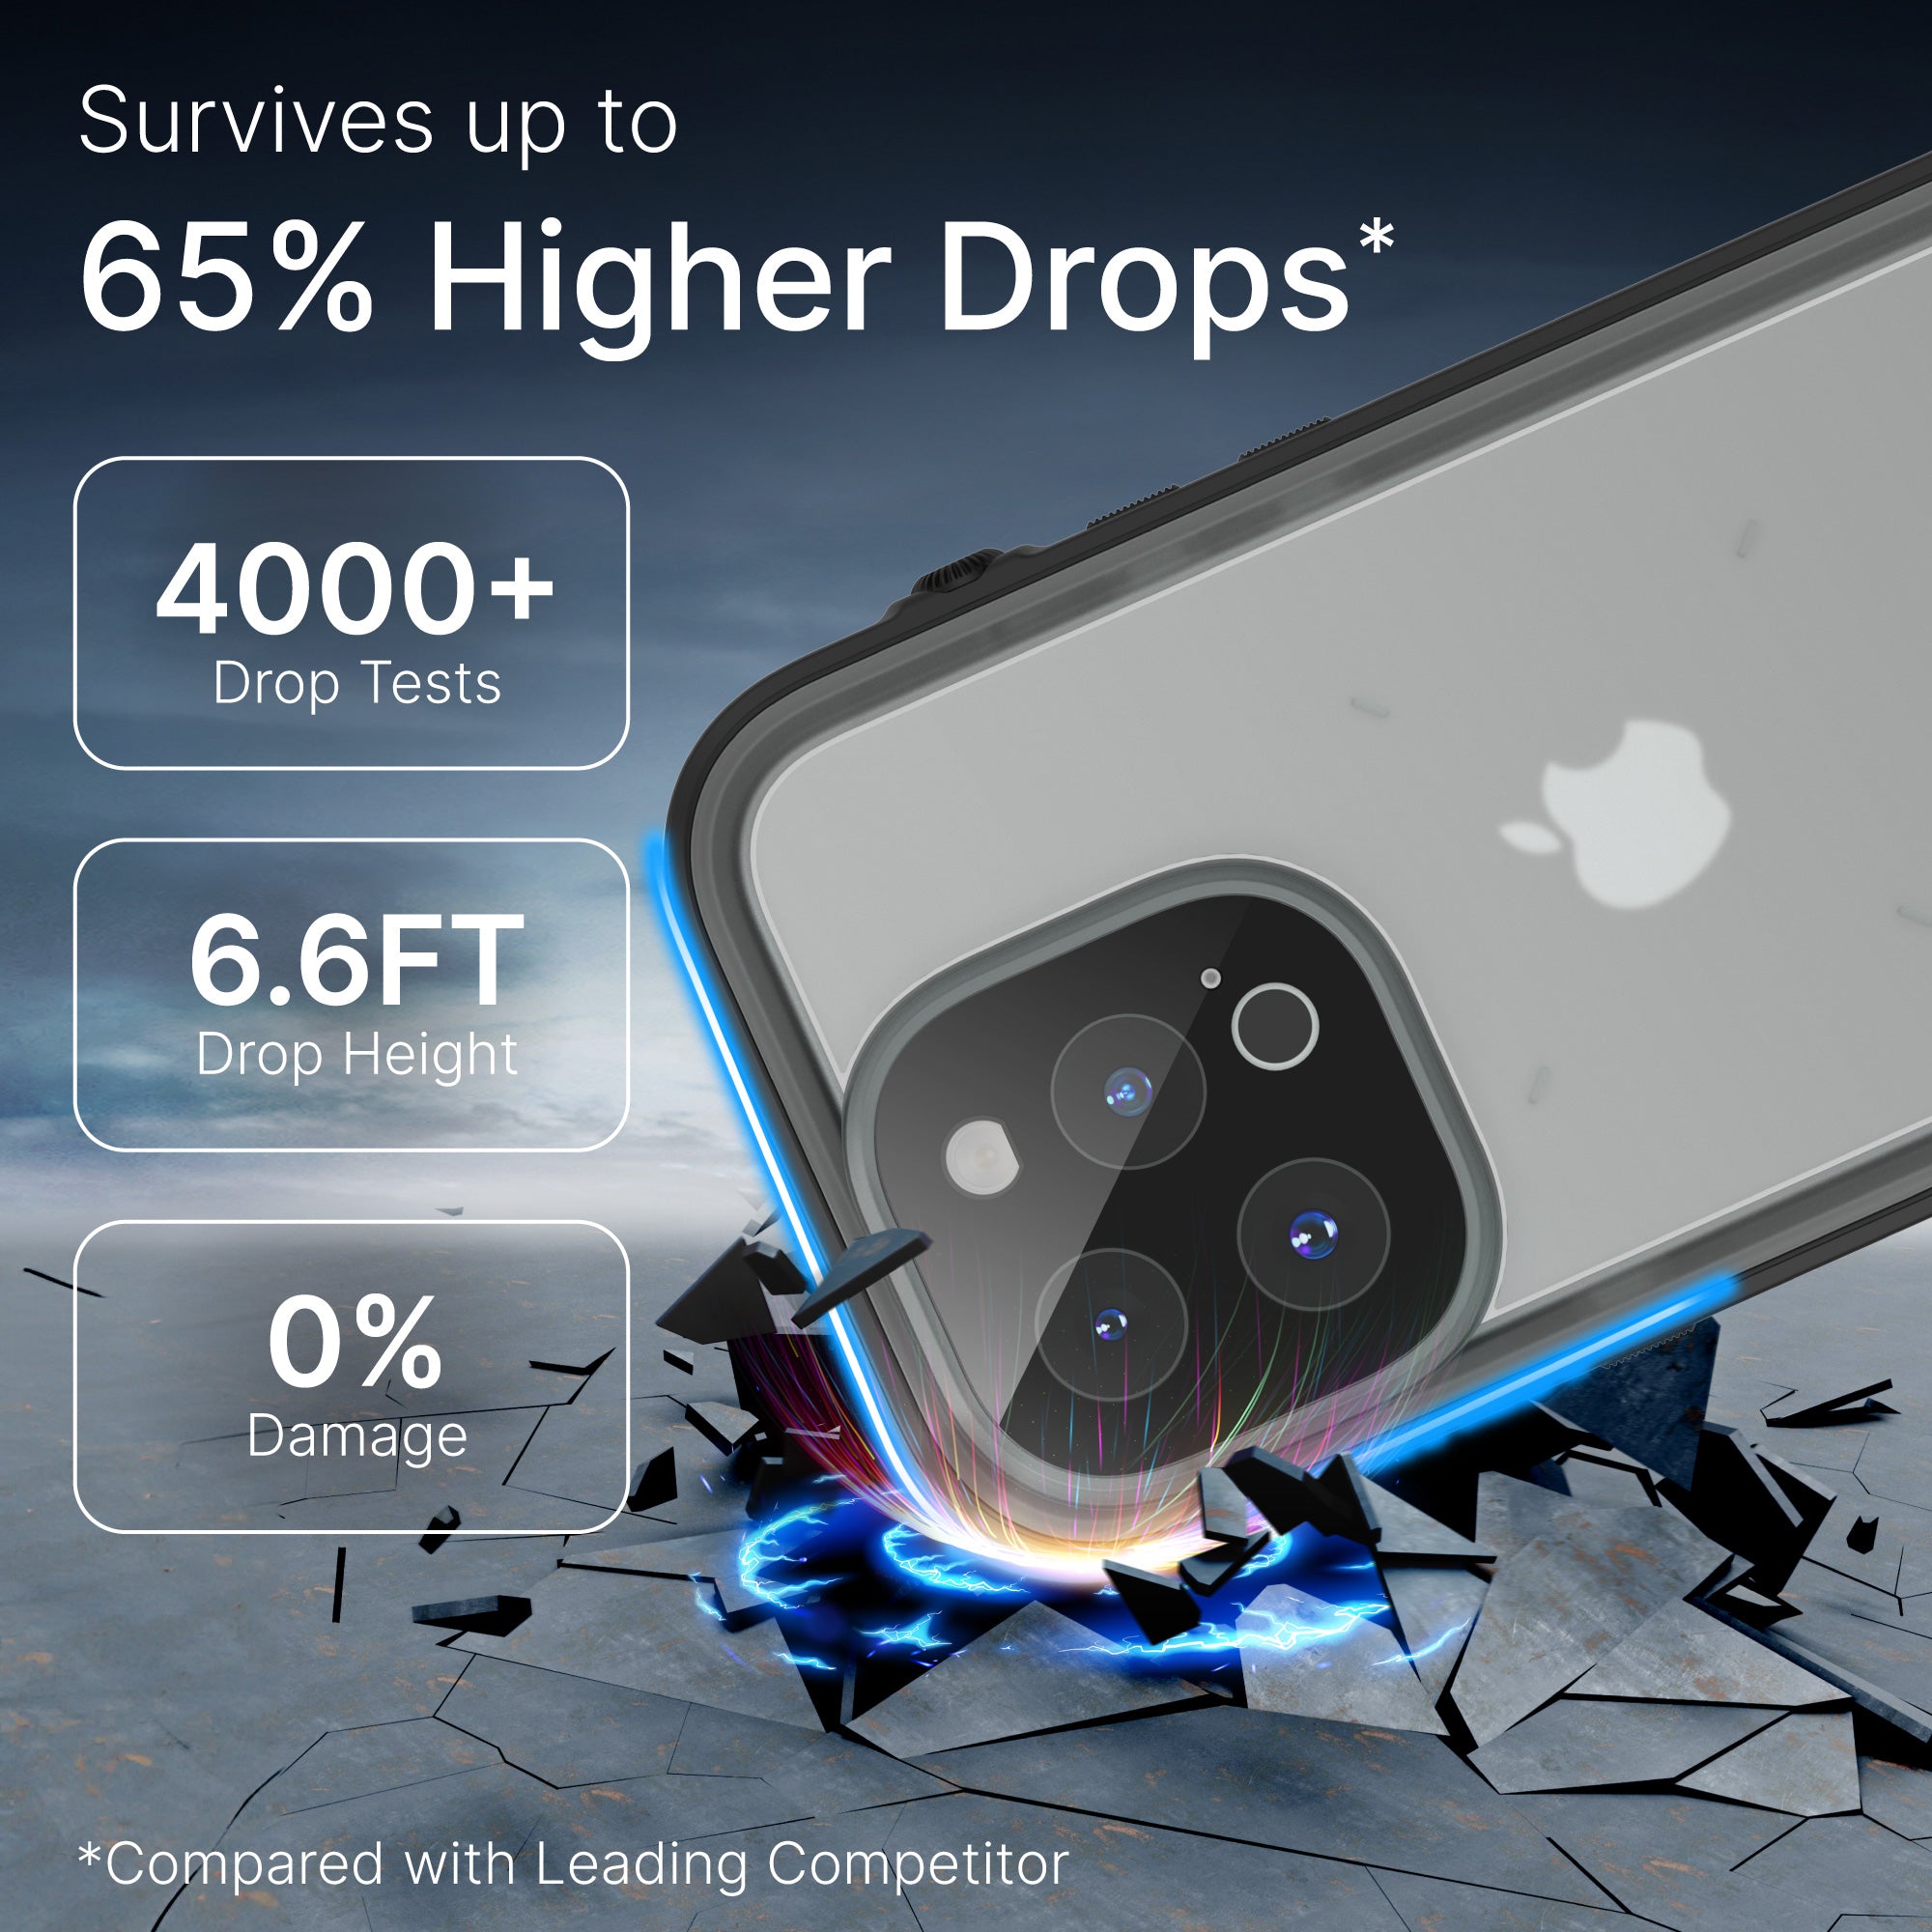 CATIPHO14BLKLP-FBA | Catalyst iPhone 14 Pro Max Waterproof Case Total Protection drop proof 65 percent higher drops